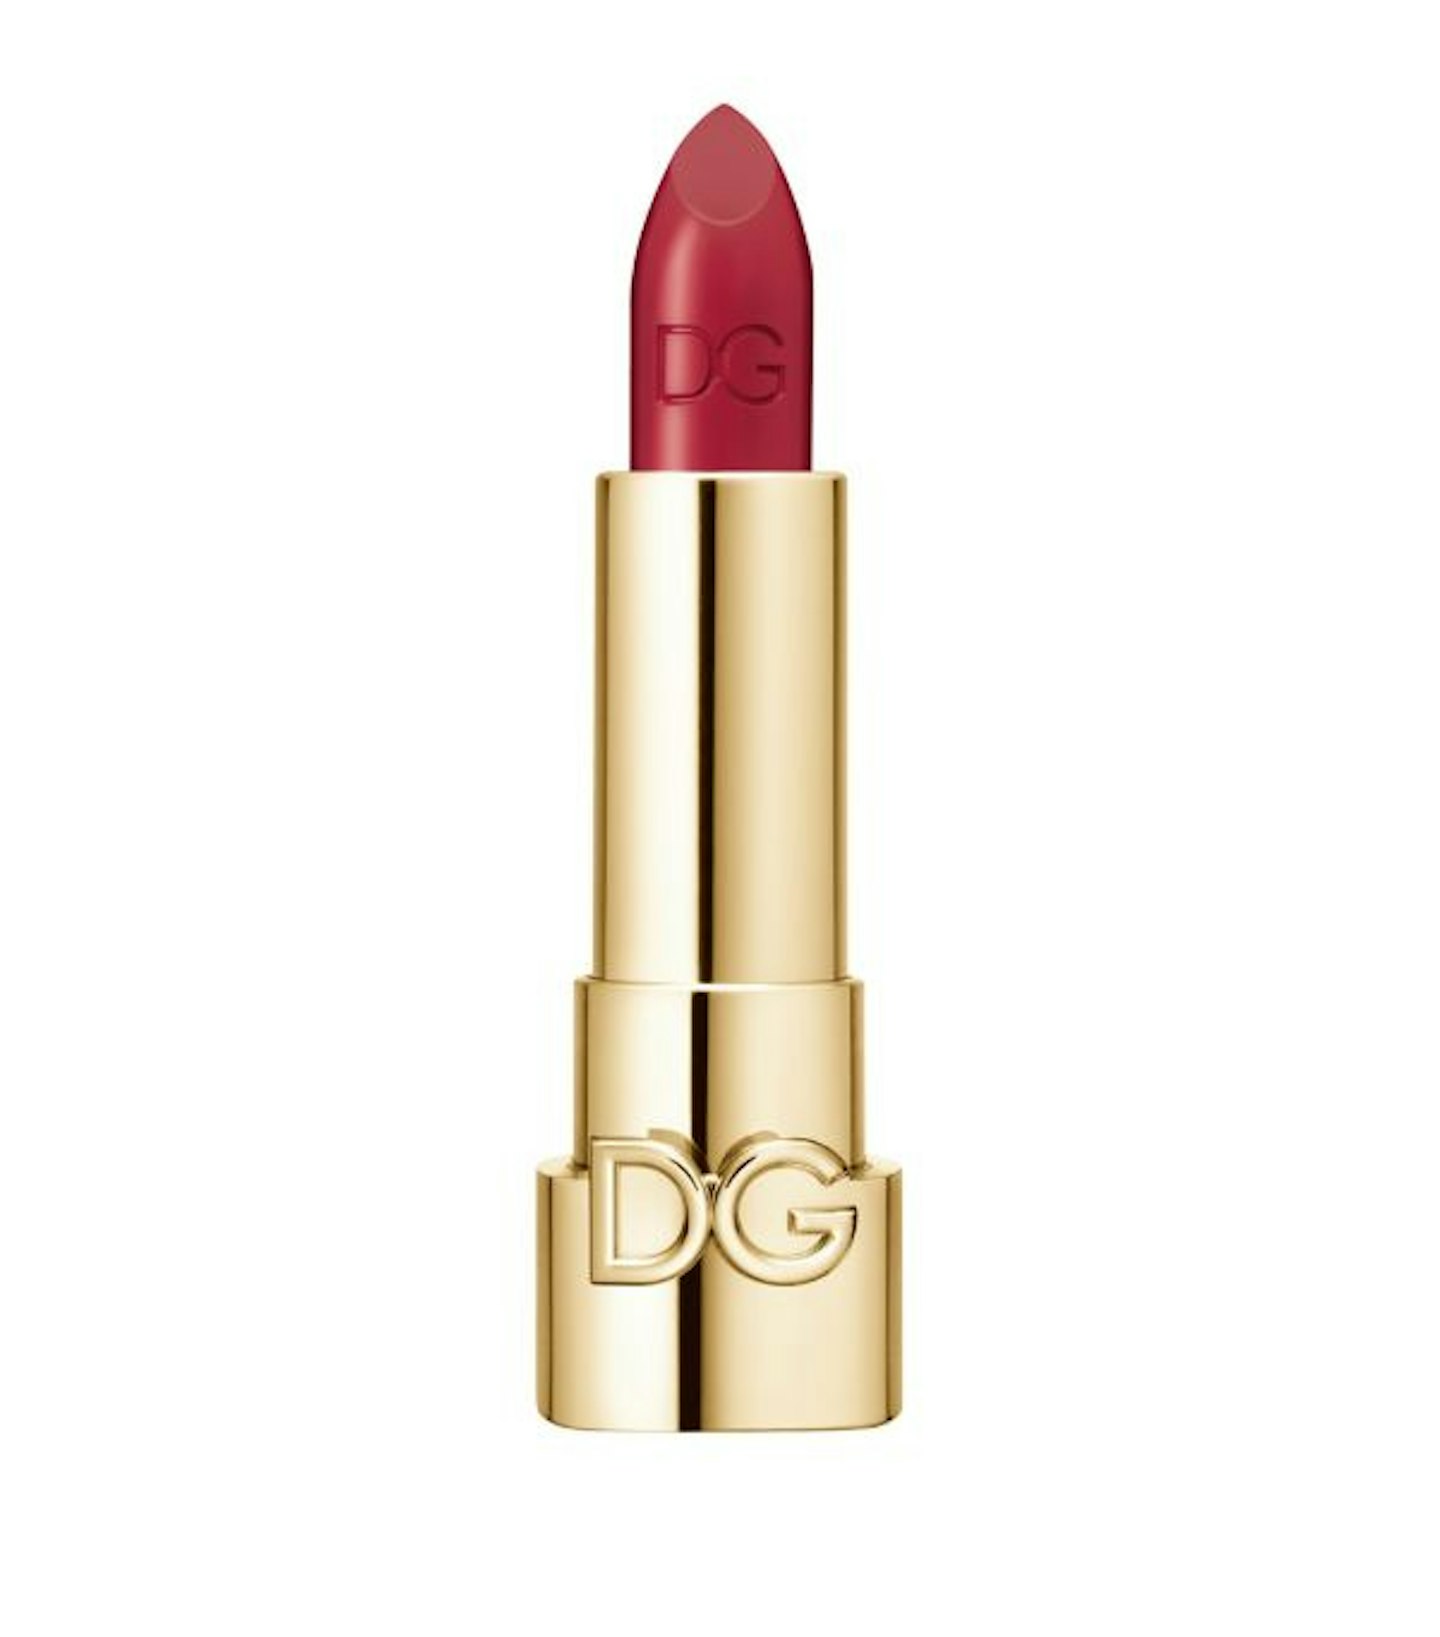 Dolce & Gabbana The Only One Luminous Colour Lipstick in 640 Amore, from £30